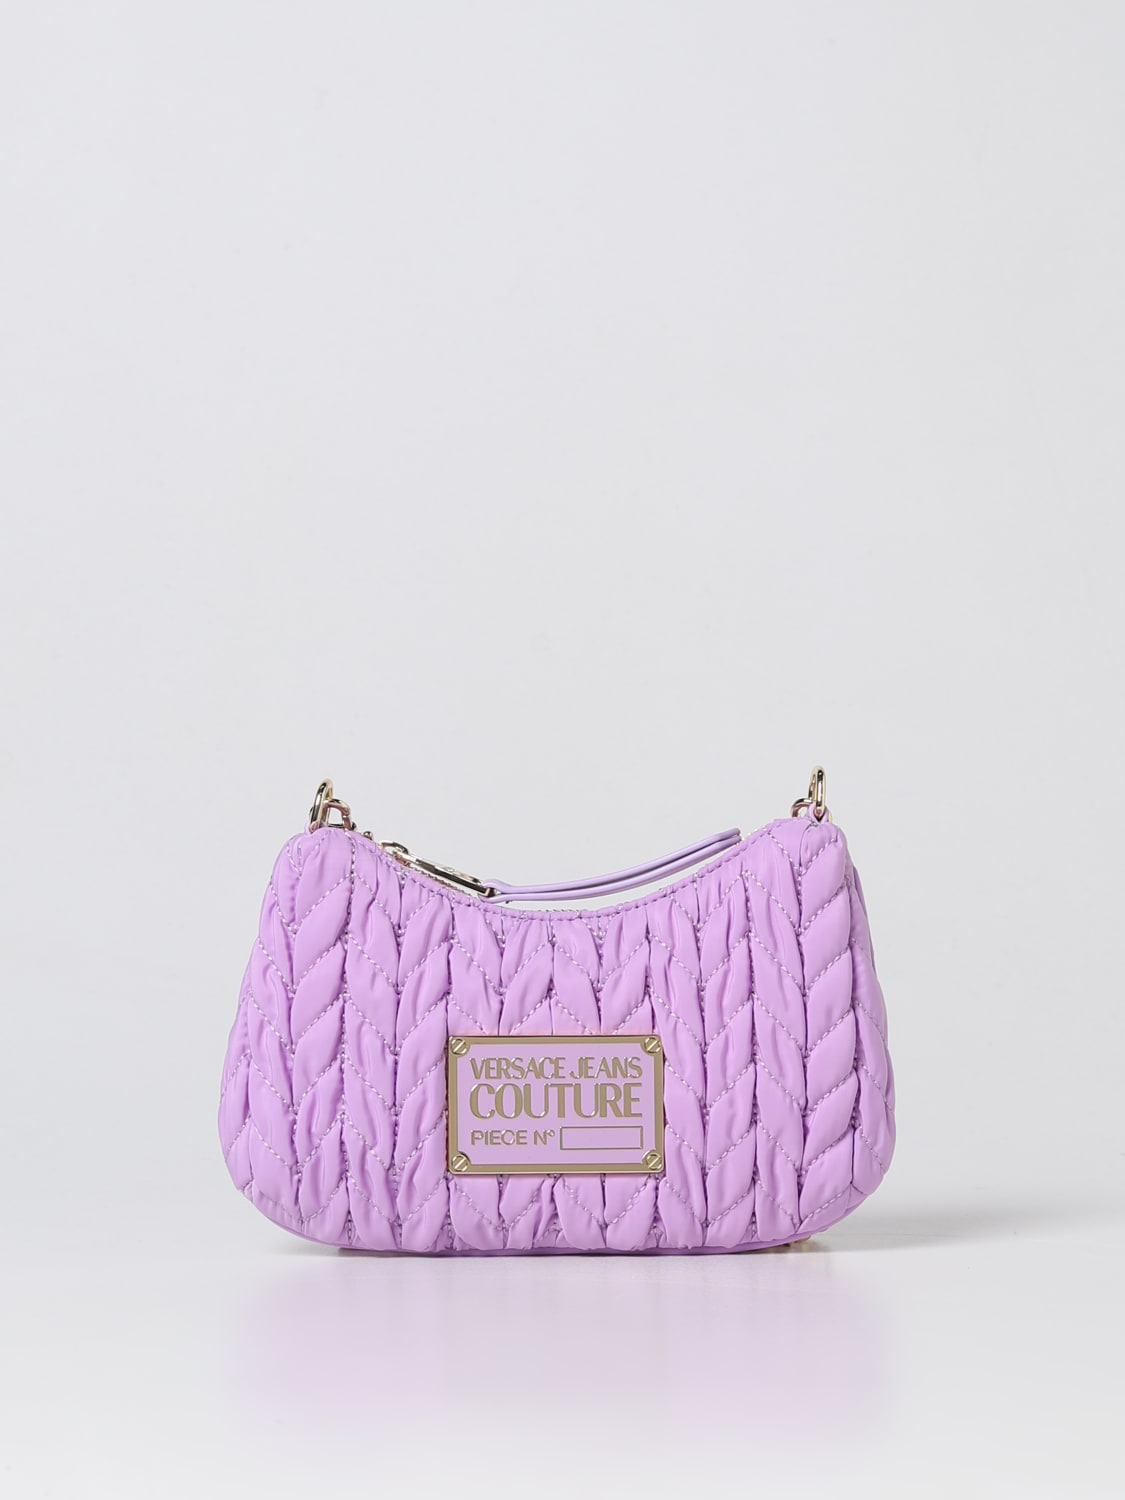 versace jeans couture bag